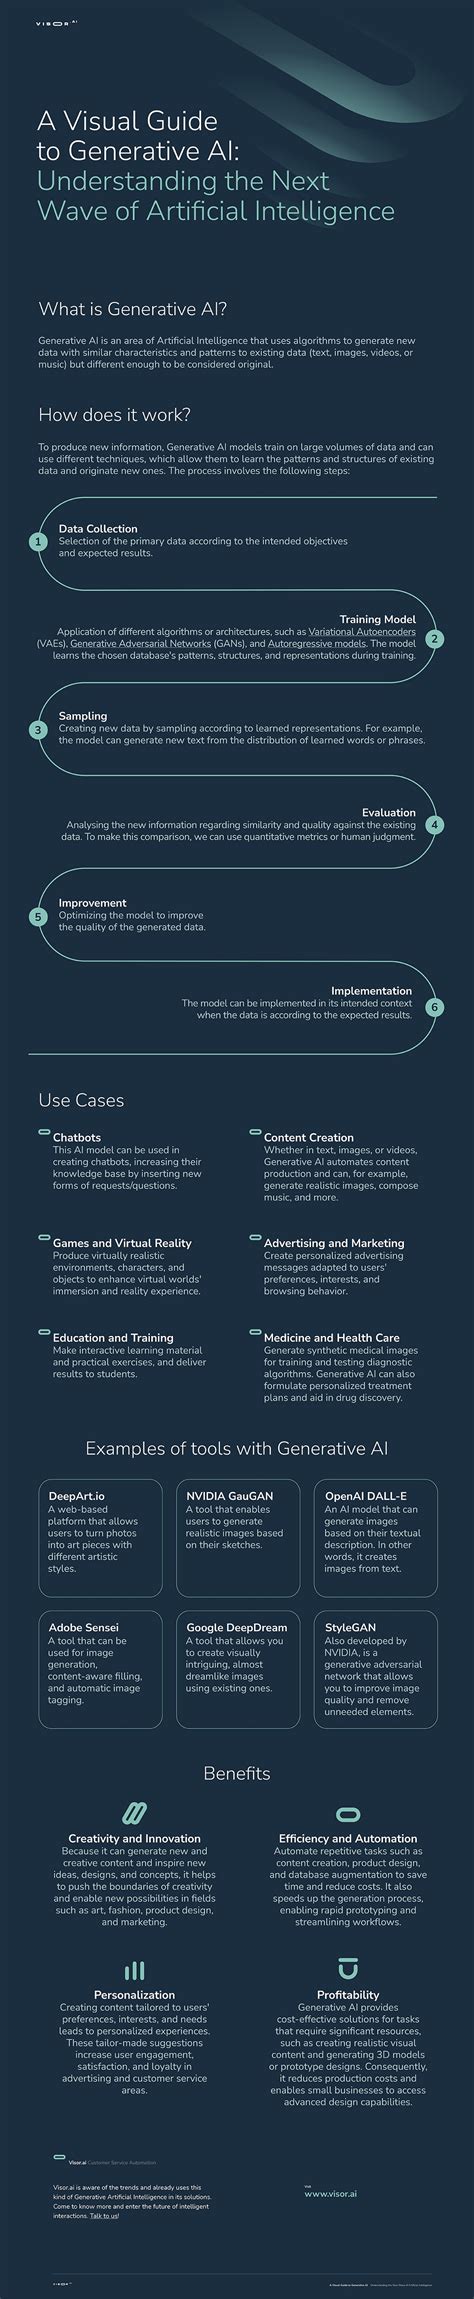 Infographic A Visual Guide To Generative Ai